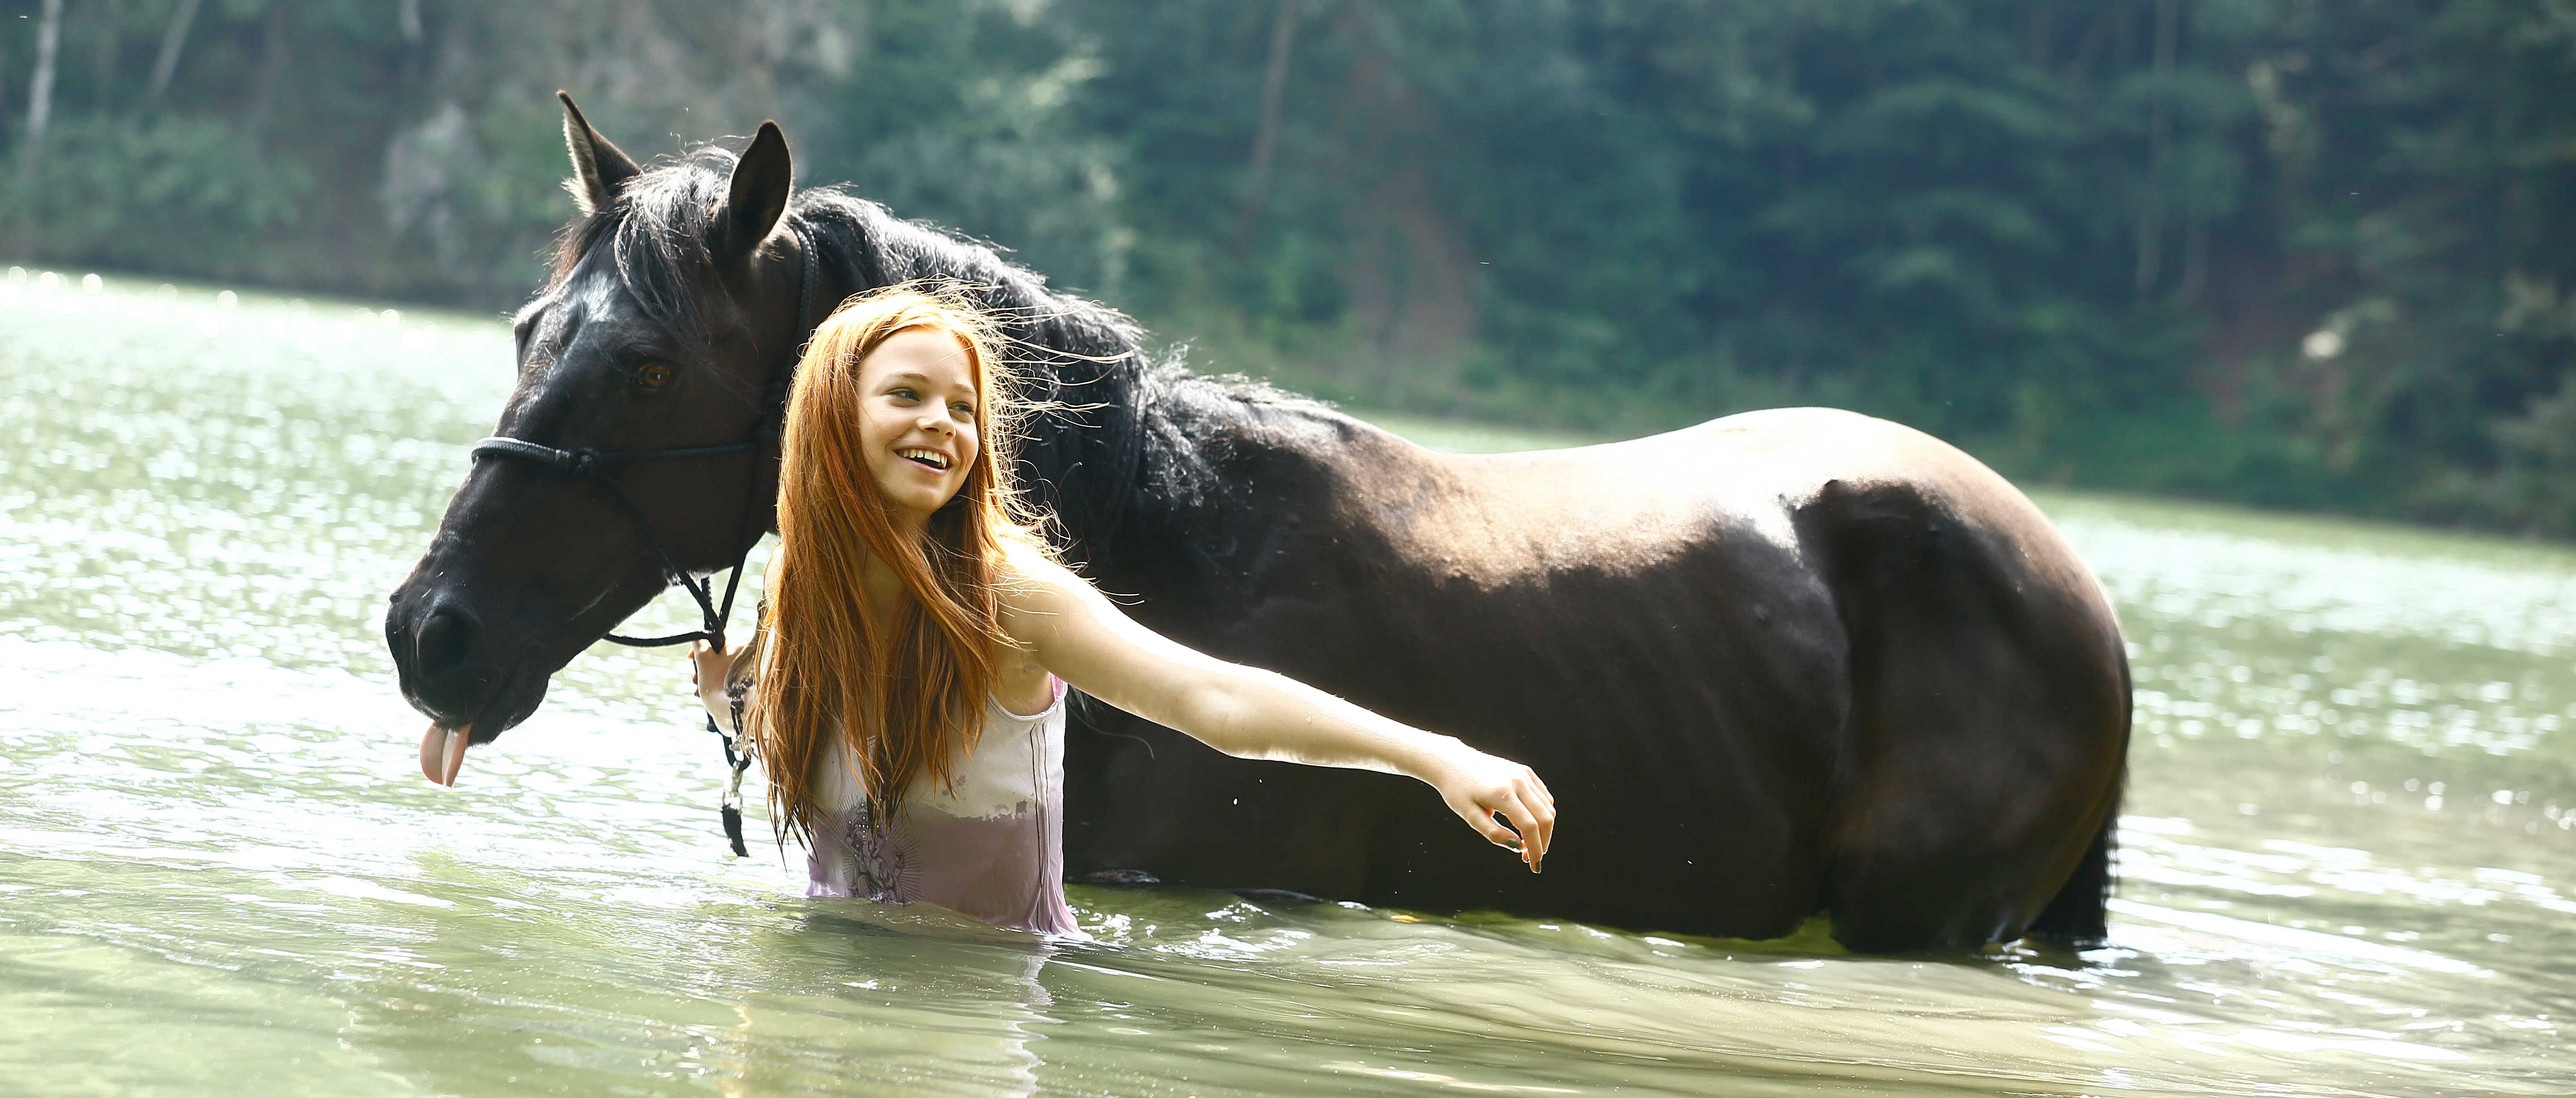 Women Wet Horse Redhead Laughing Women With Horse 5758x2454